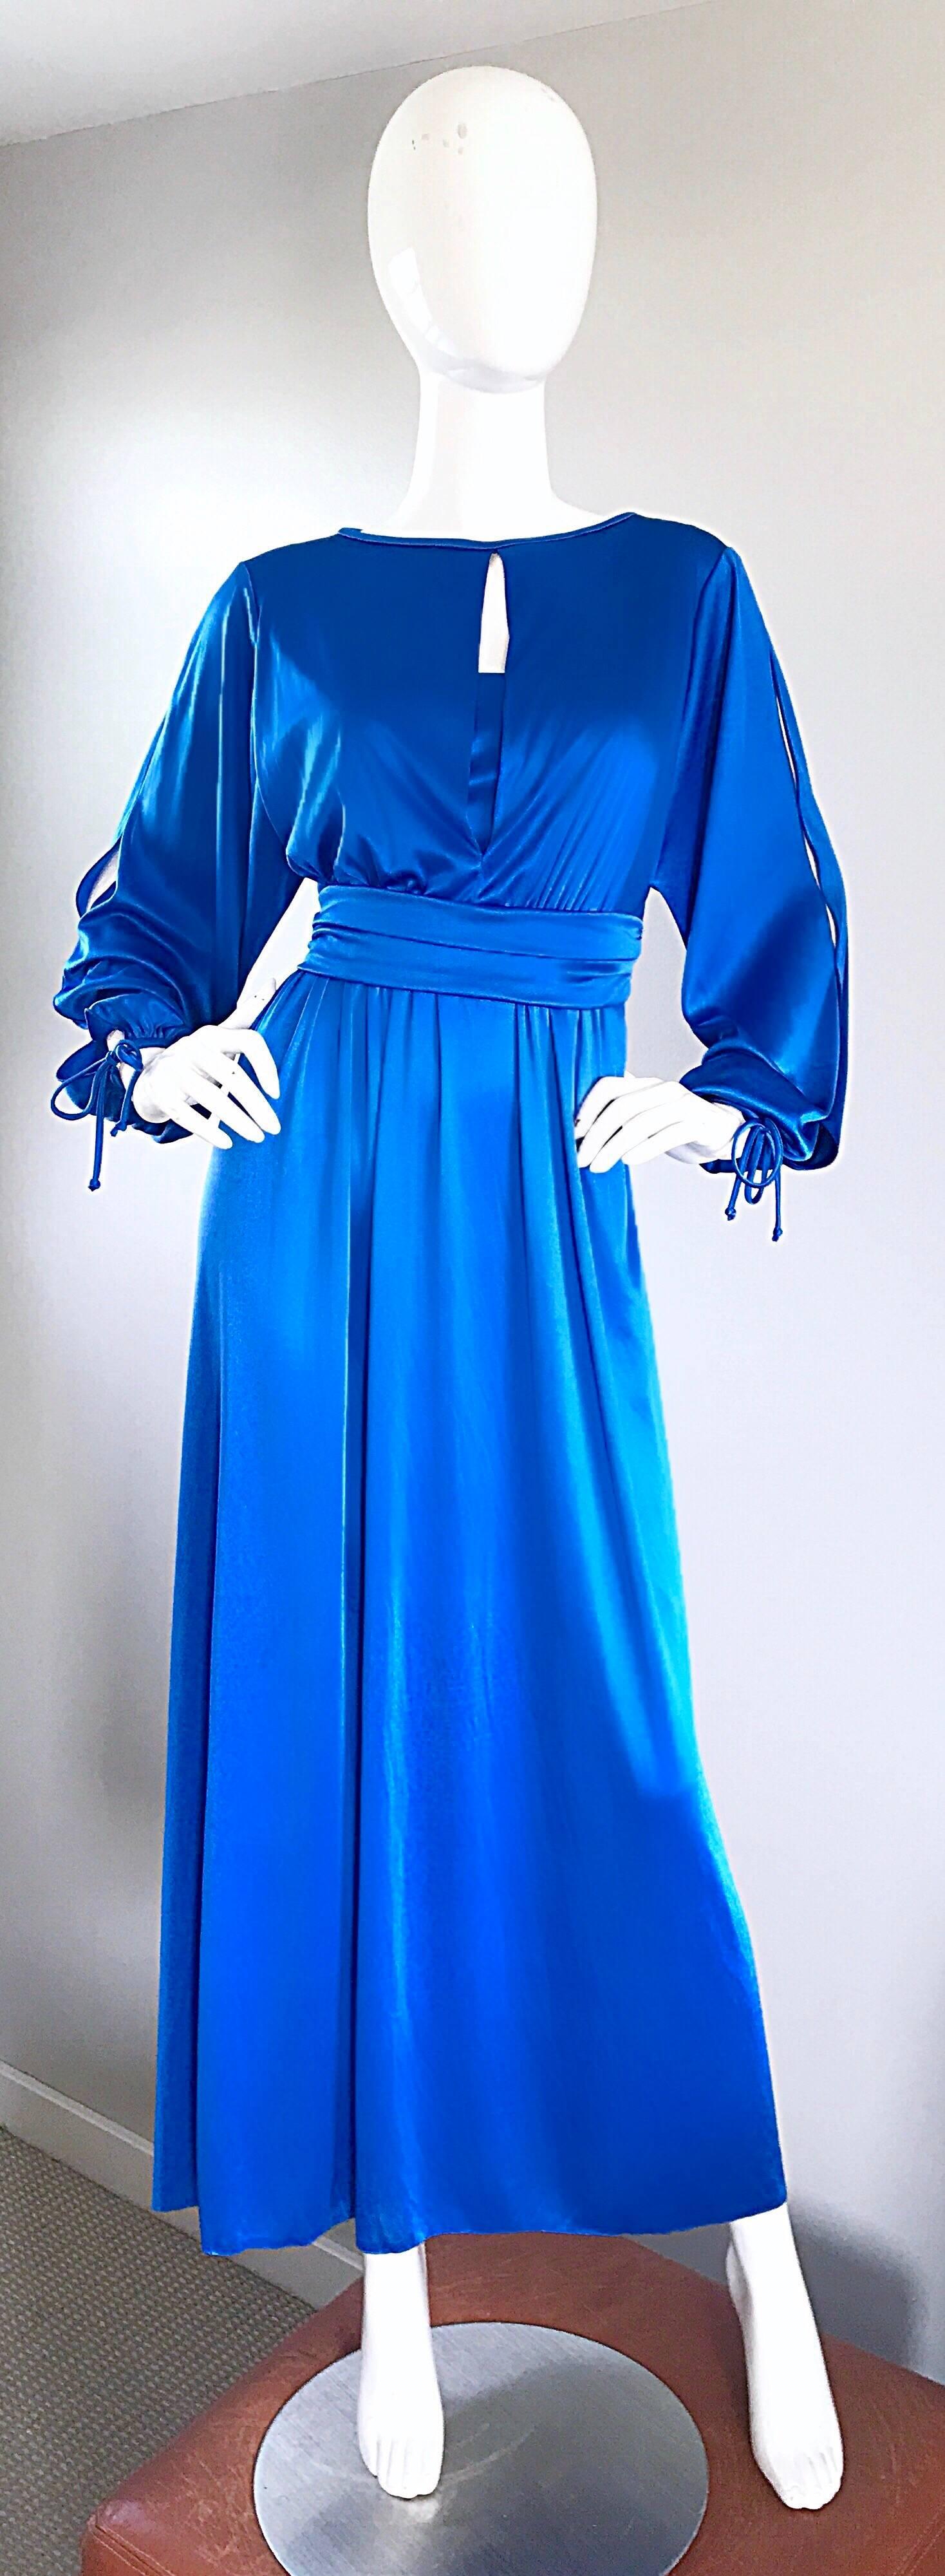 Amazing 1970s HOUSE OF BIANCHI royal blue jersey disco gown! Features a fitted bodice, with a plunging neckline. Built in interior shelf at bust. Long bishop sleeves tie at each cuff, and have open slits up the arms and shoulders. Hidden zipper up